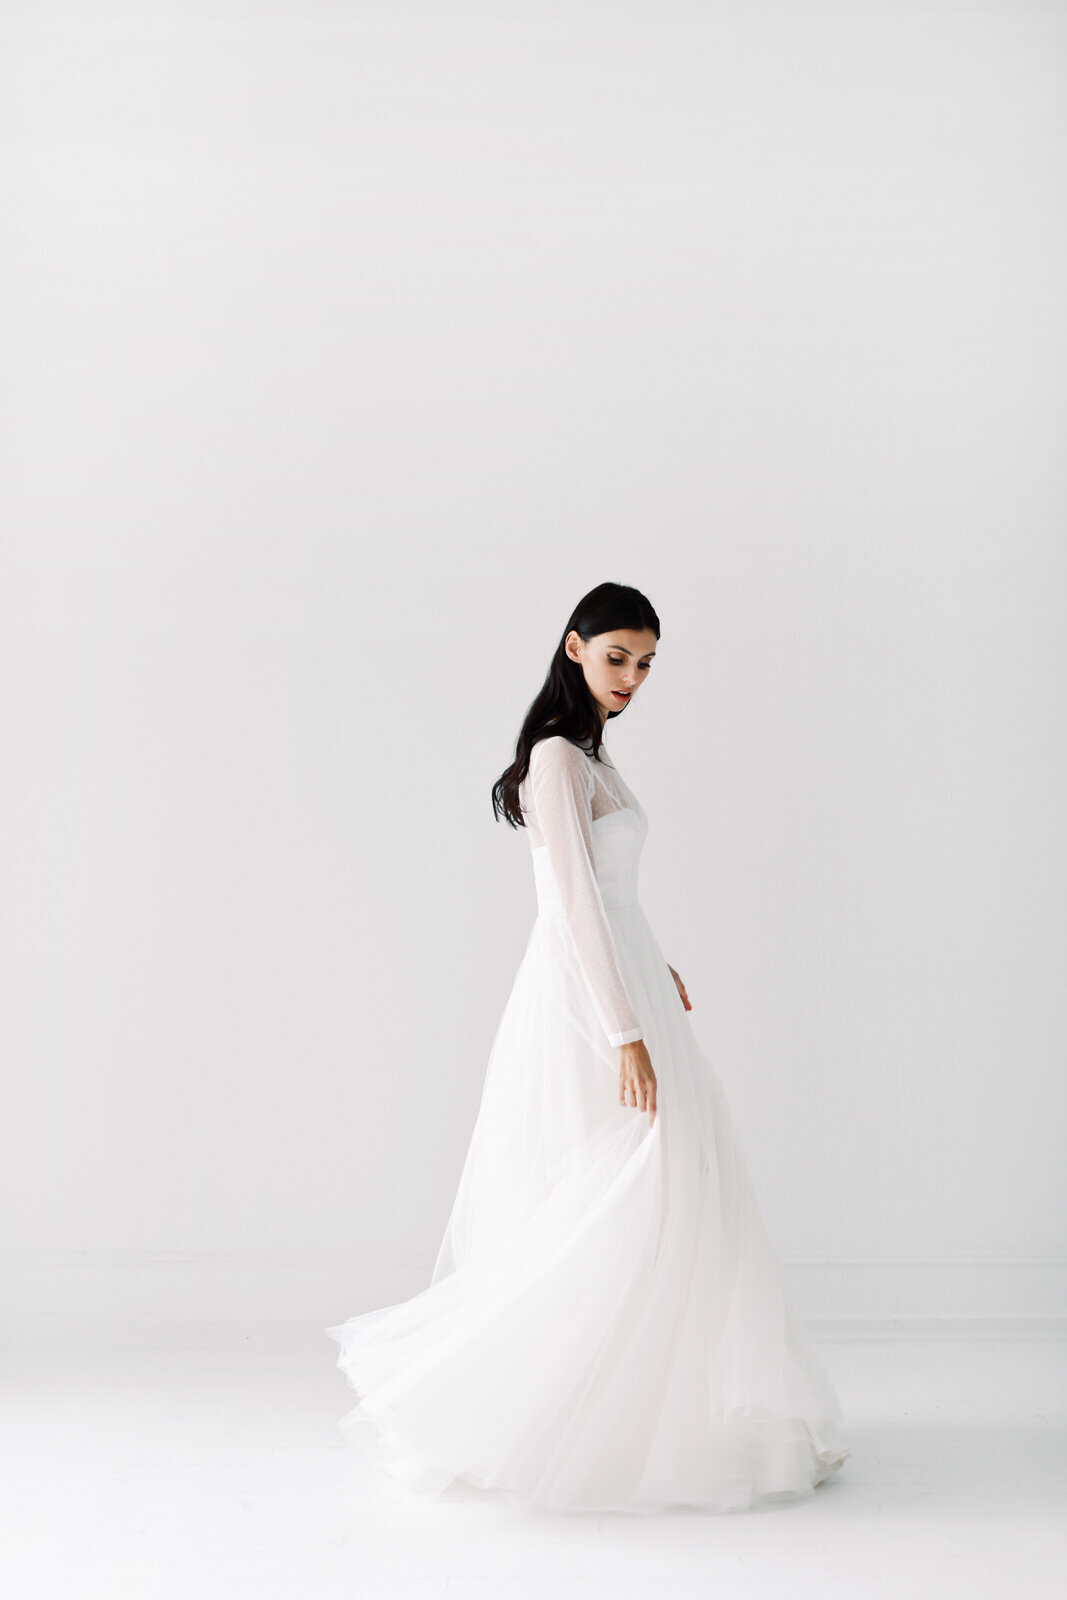 Stylish Bridal Editorial Photography for a New York City Brand 4